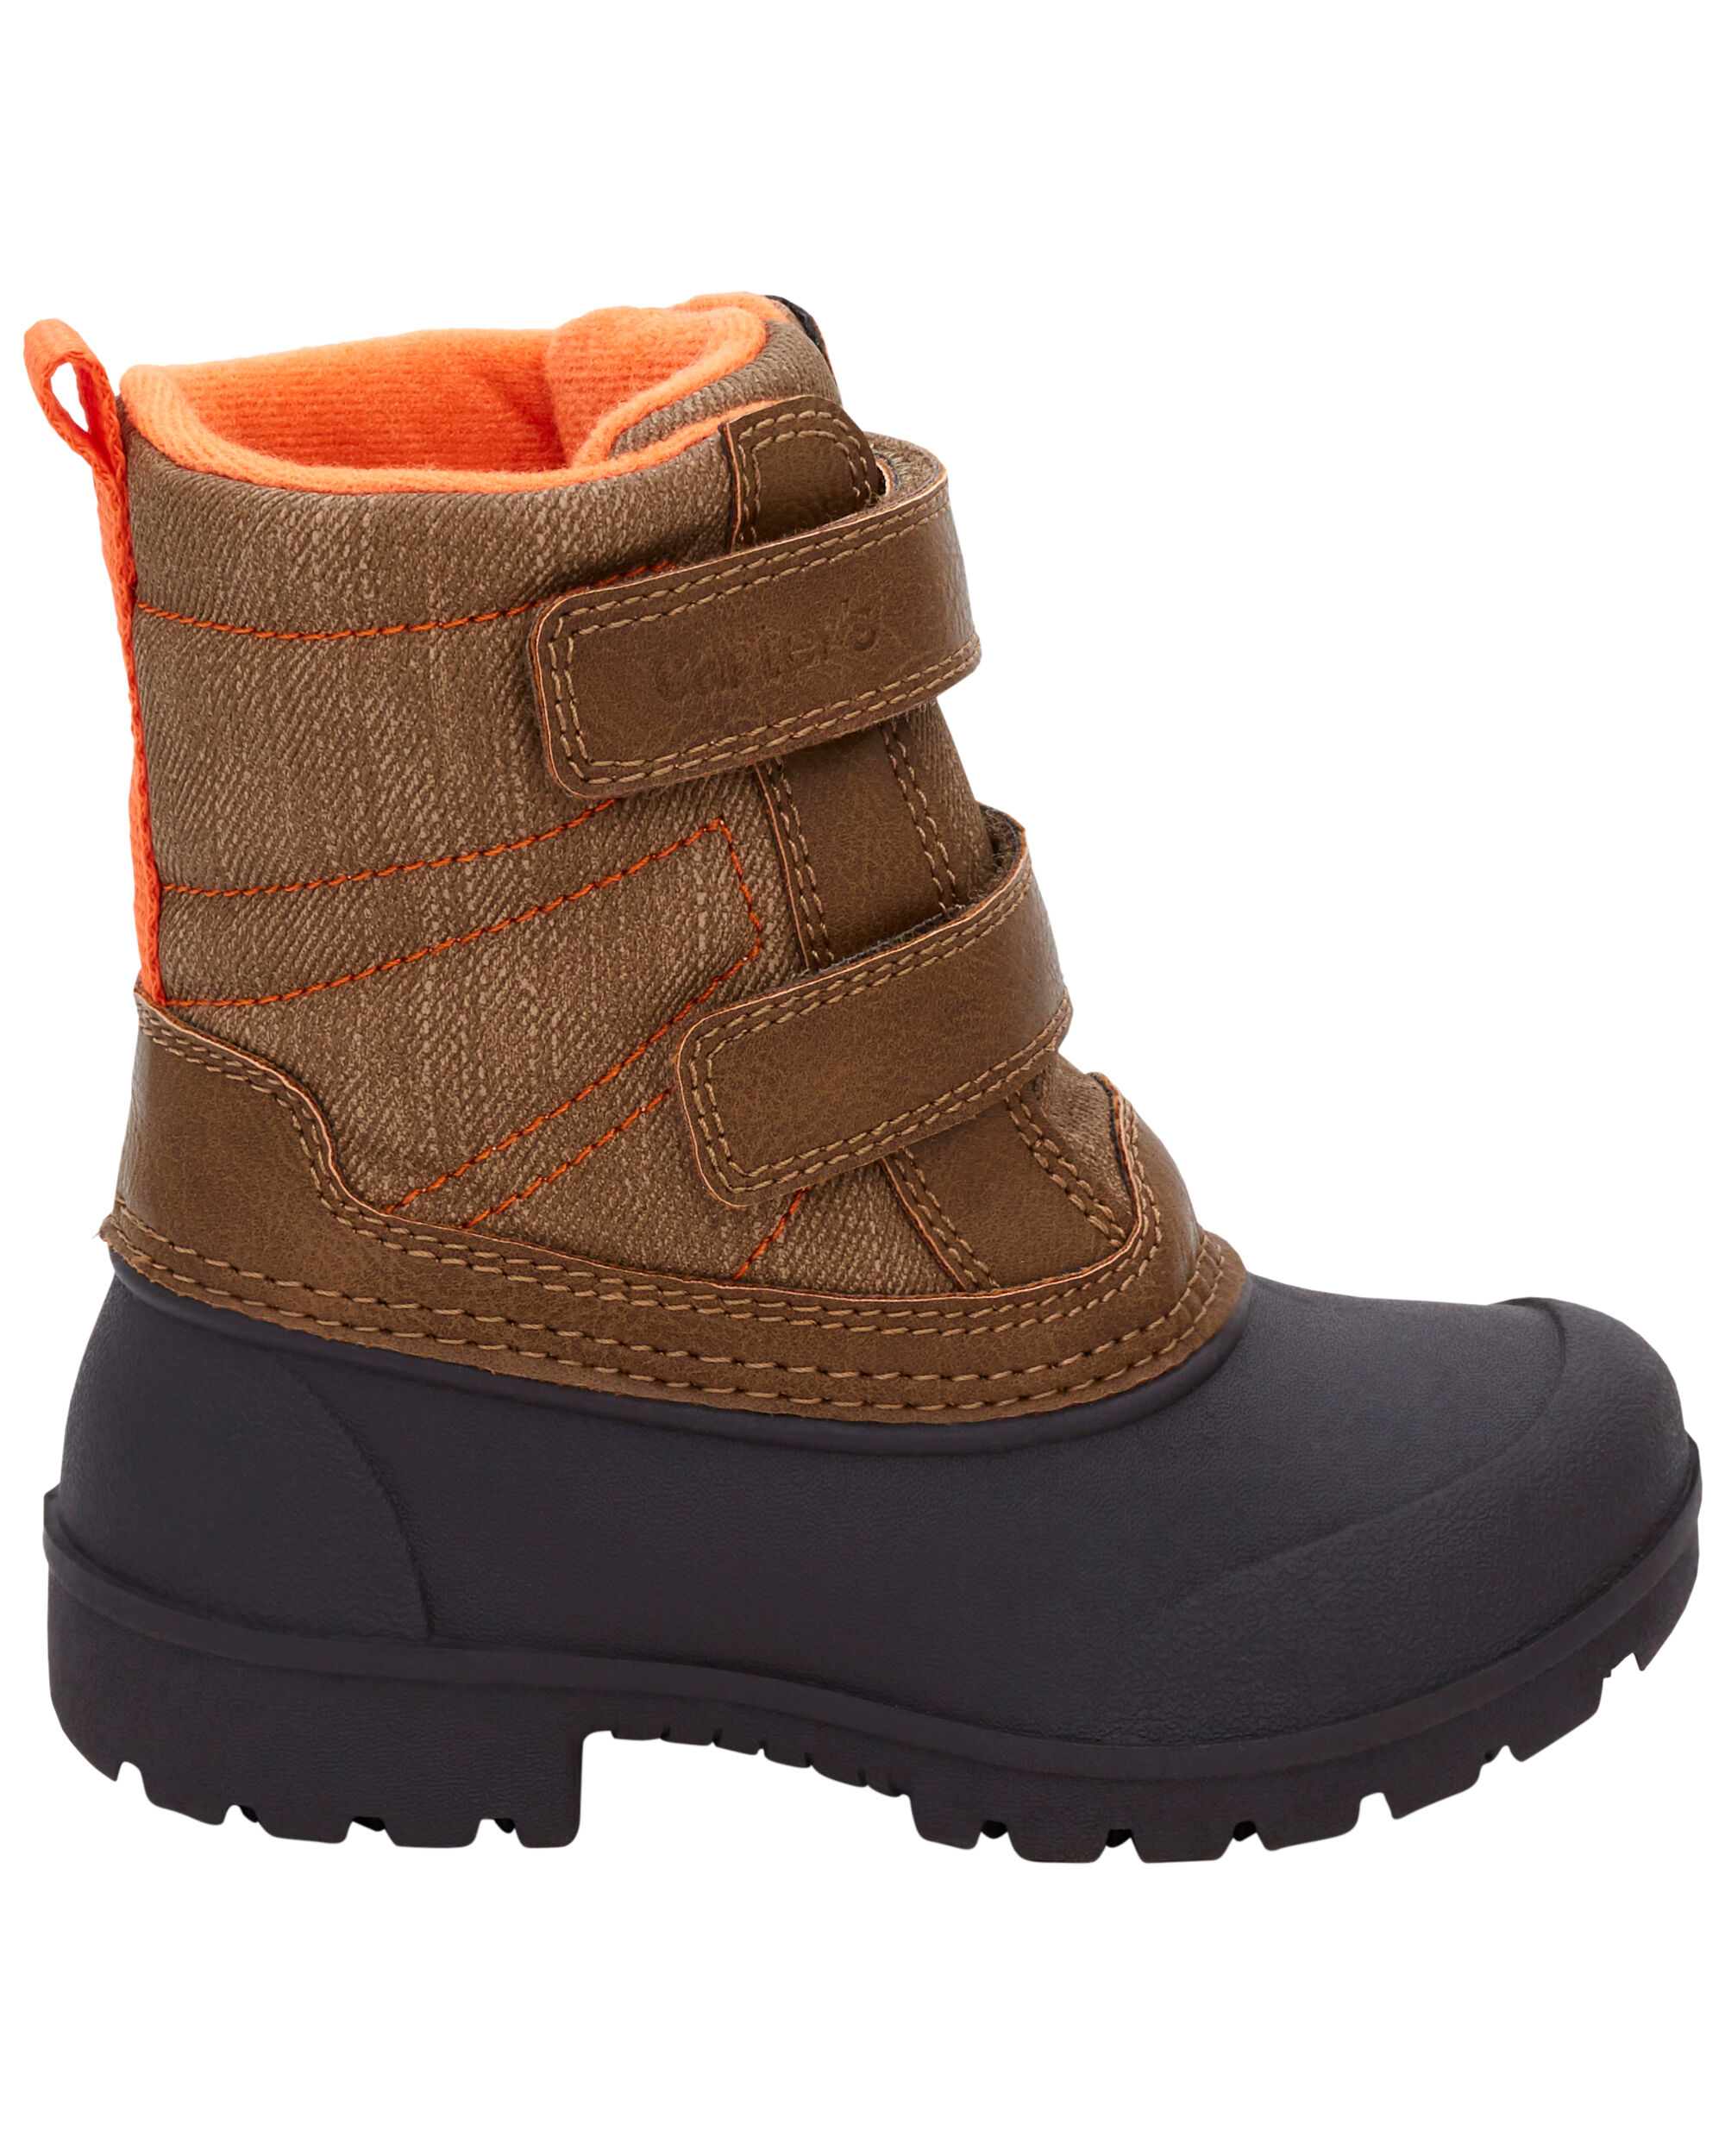 Boy Shoes (Sizes 13-3Y): Boots | Carter's | Free Shipping